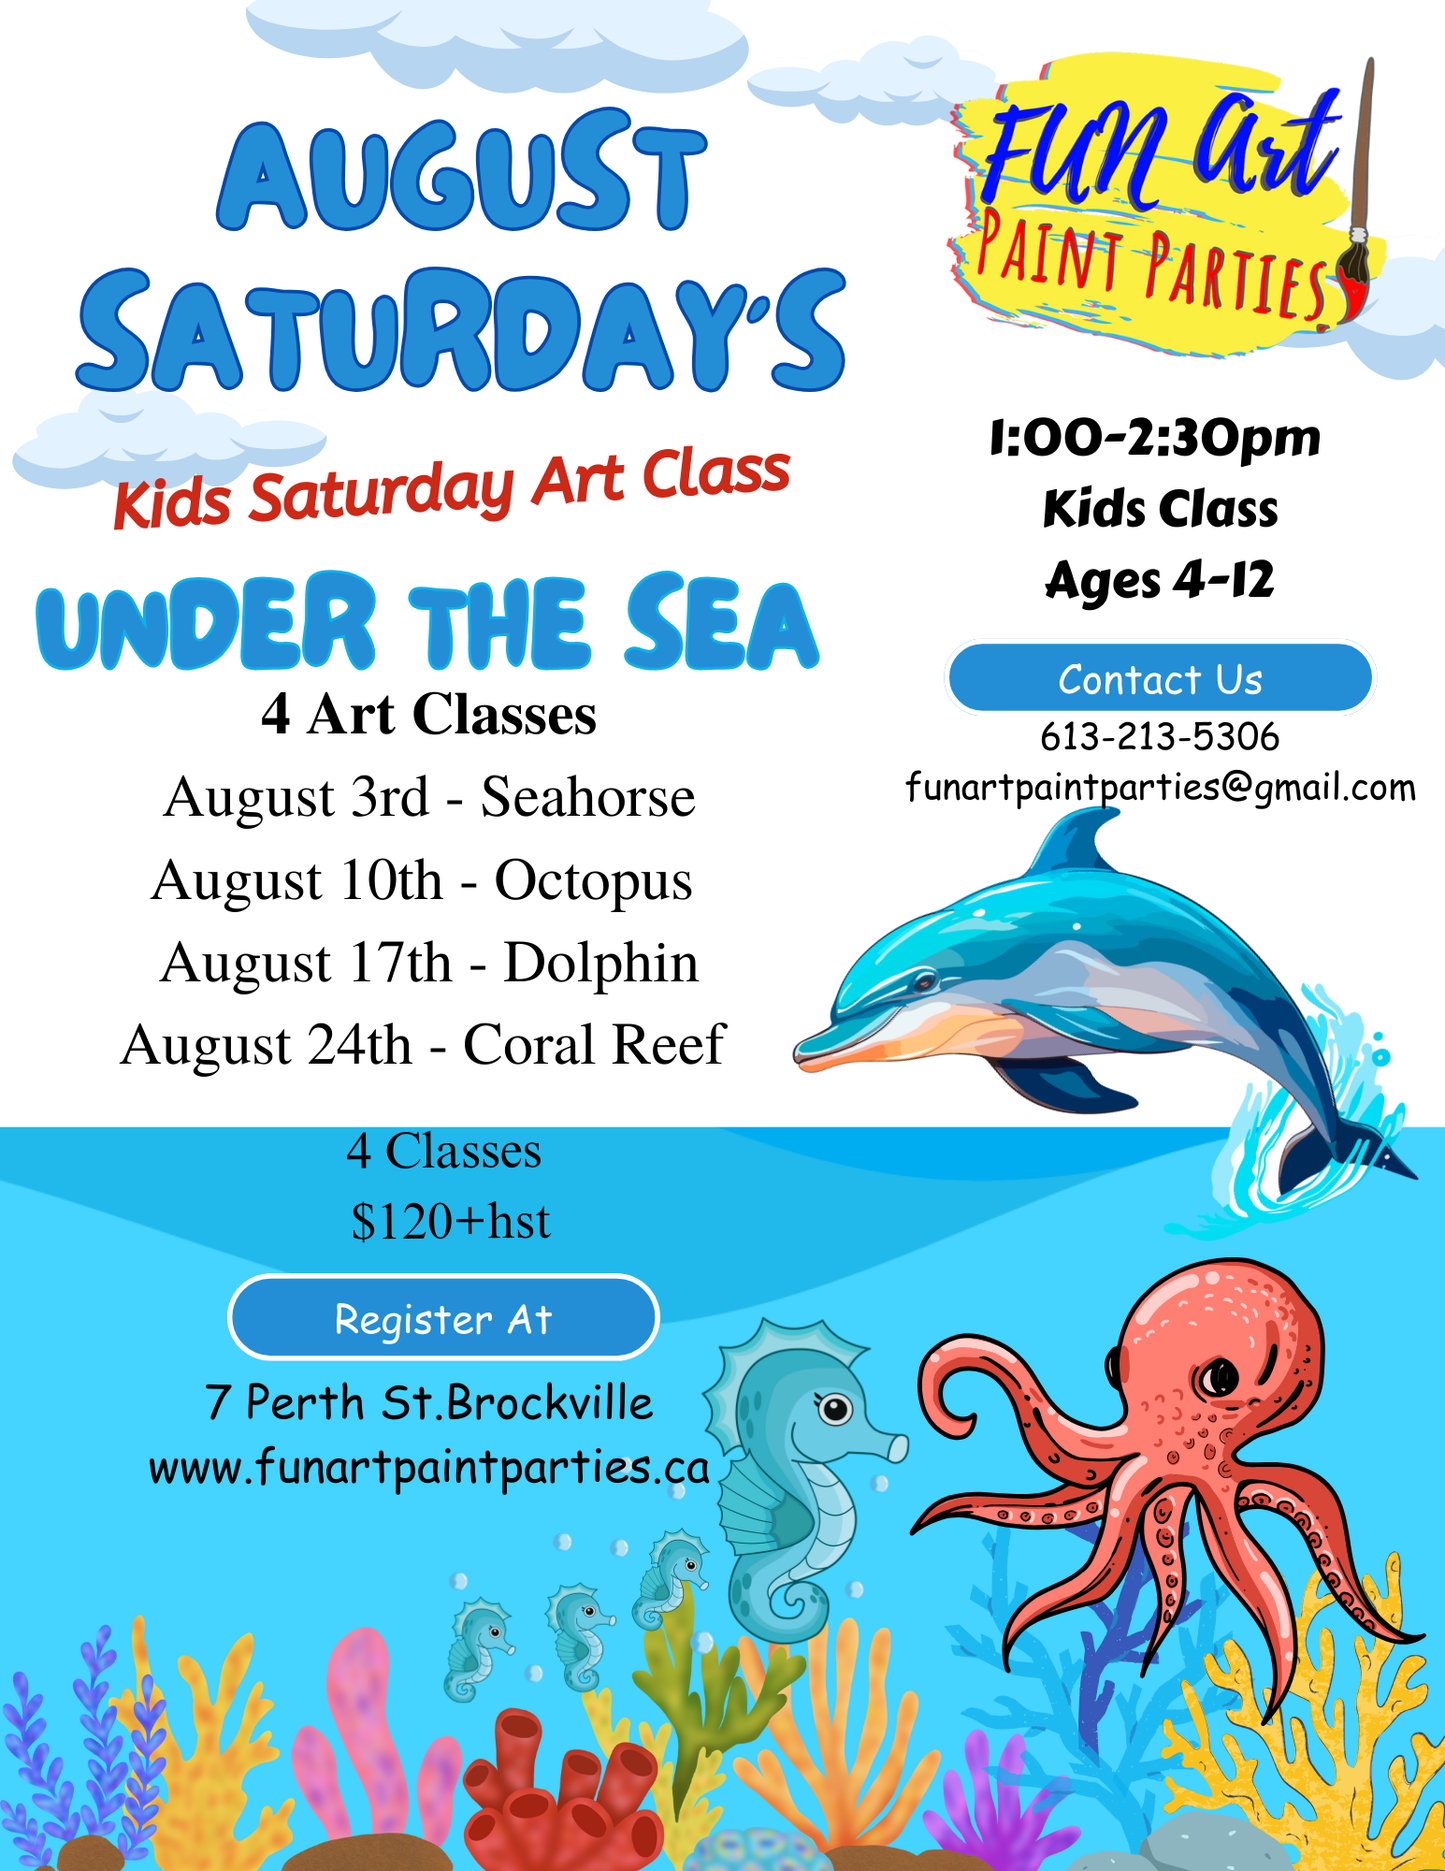 Under The Sea - SOLD OUT  Saturday Art Classes for Kids